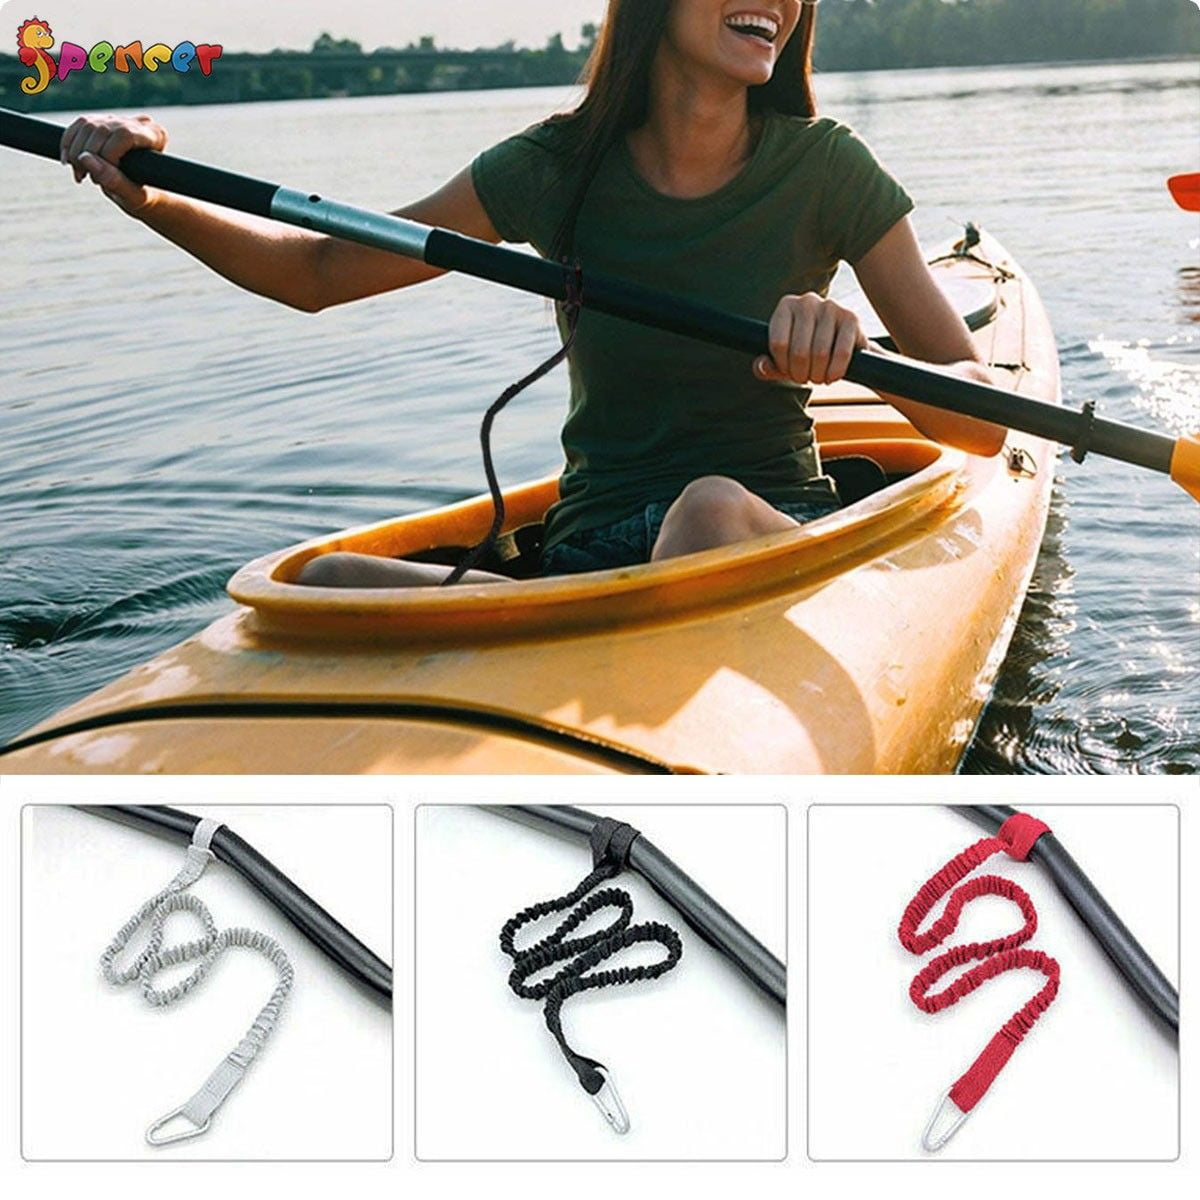 Premium Kayak Anchor Tow Rope Canoe Boat Throw Line Floater Marine Clips